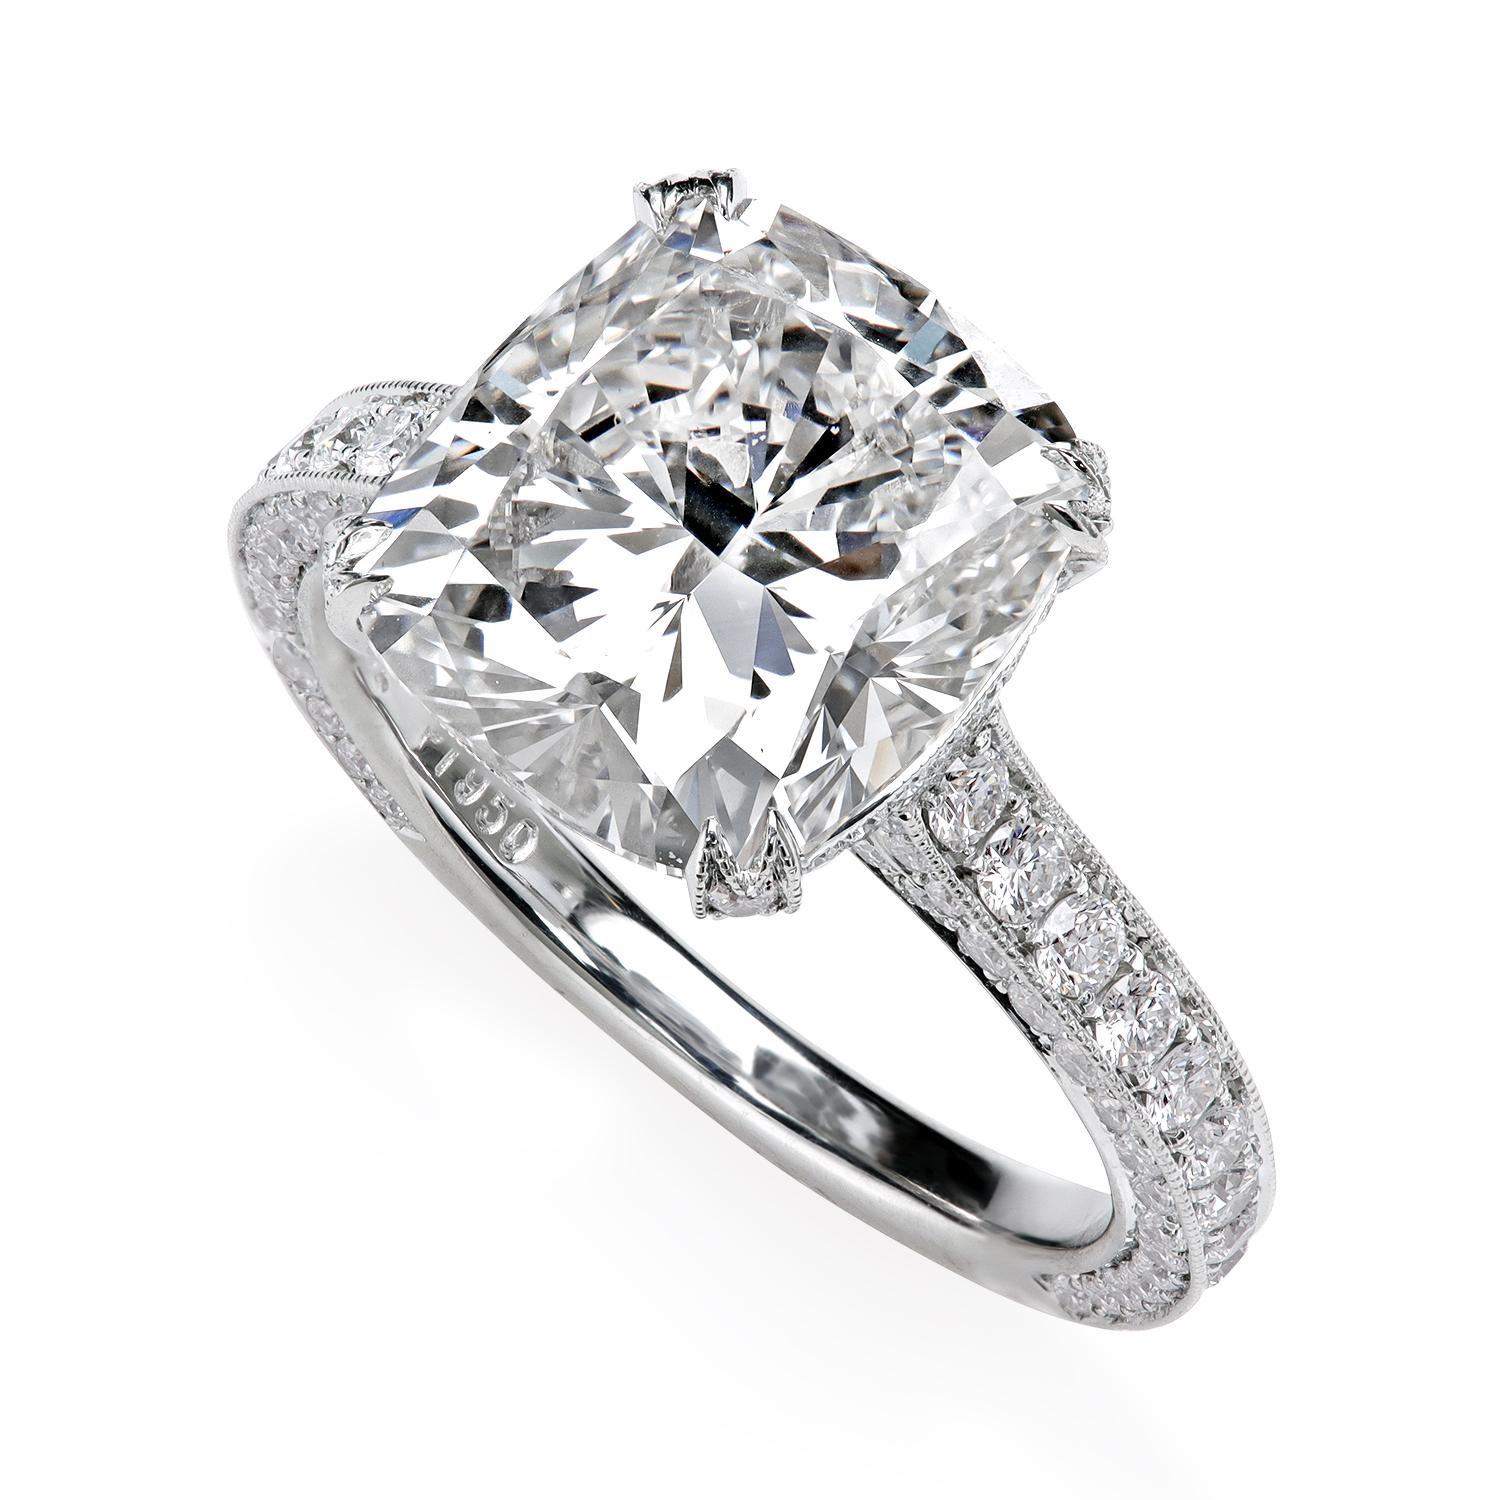 For Sale:  Leon Mege platinum engagement ring with certified cushion diamond 3